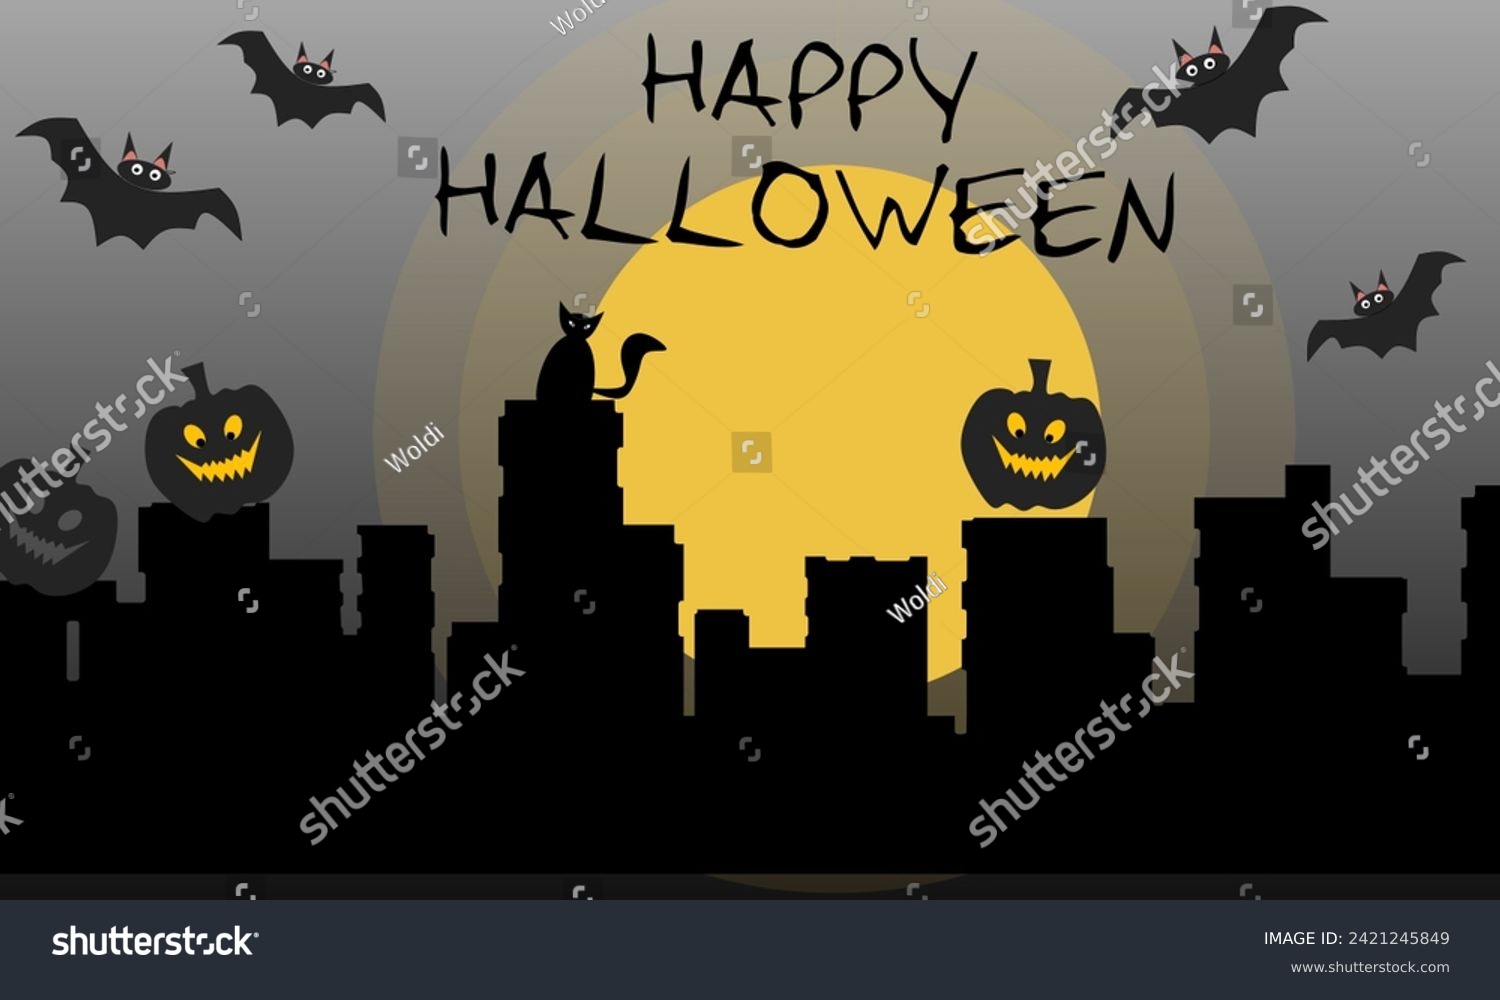 Vector illustration of Halloween day in the city at night, with moonlit silhouettes of pumpkins, cats, bats. Suitable for greeting cards, banners, posters, etc. #2421245849